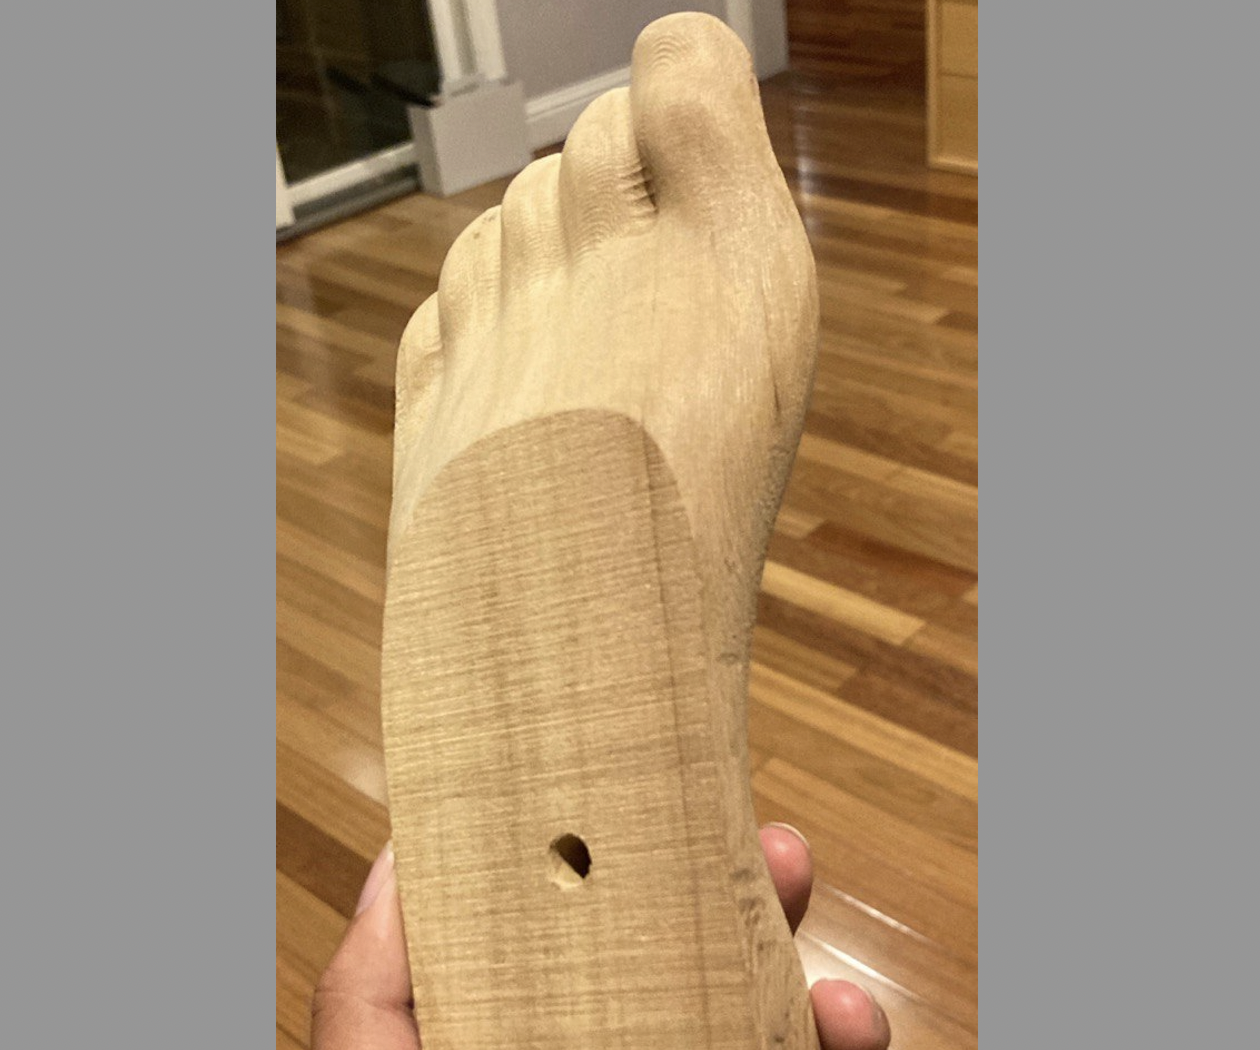 How to CNC Router Human Feet (or How to Use Fusion CAM)